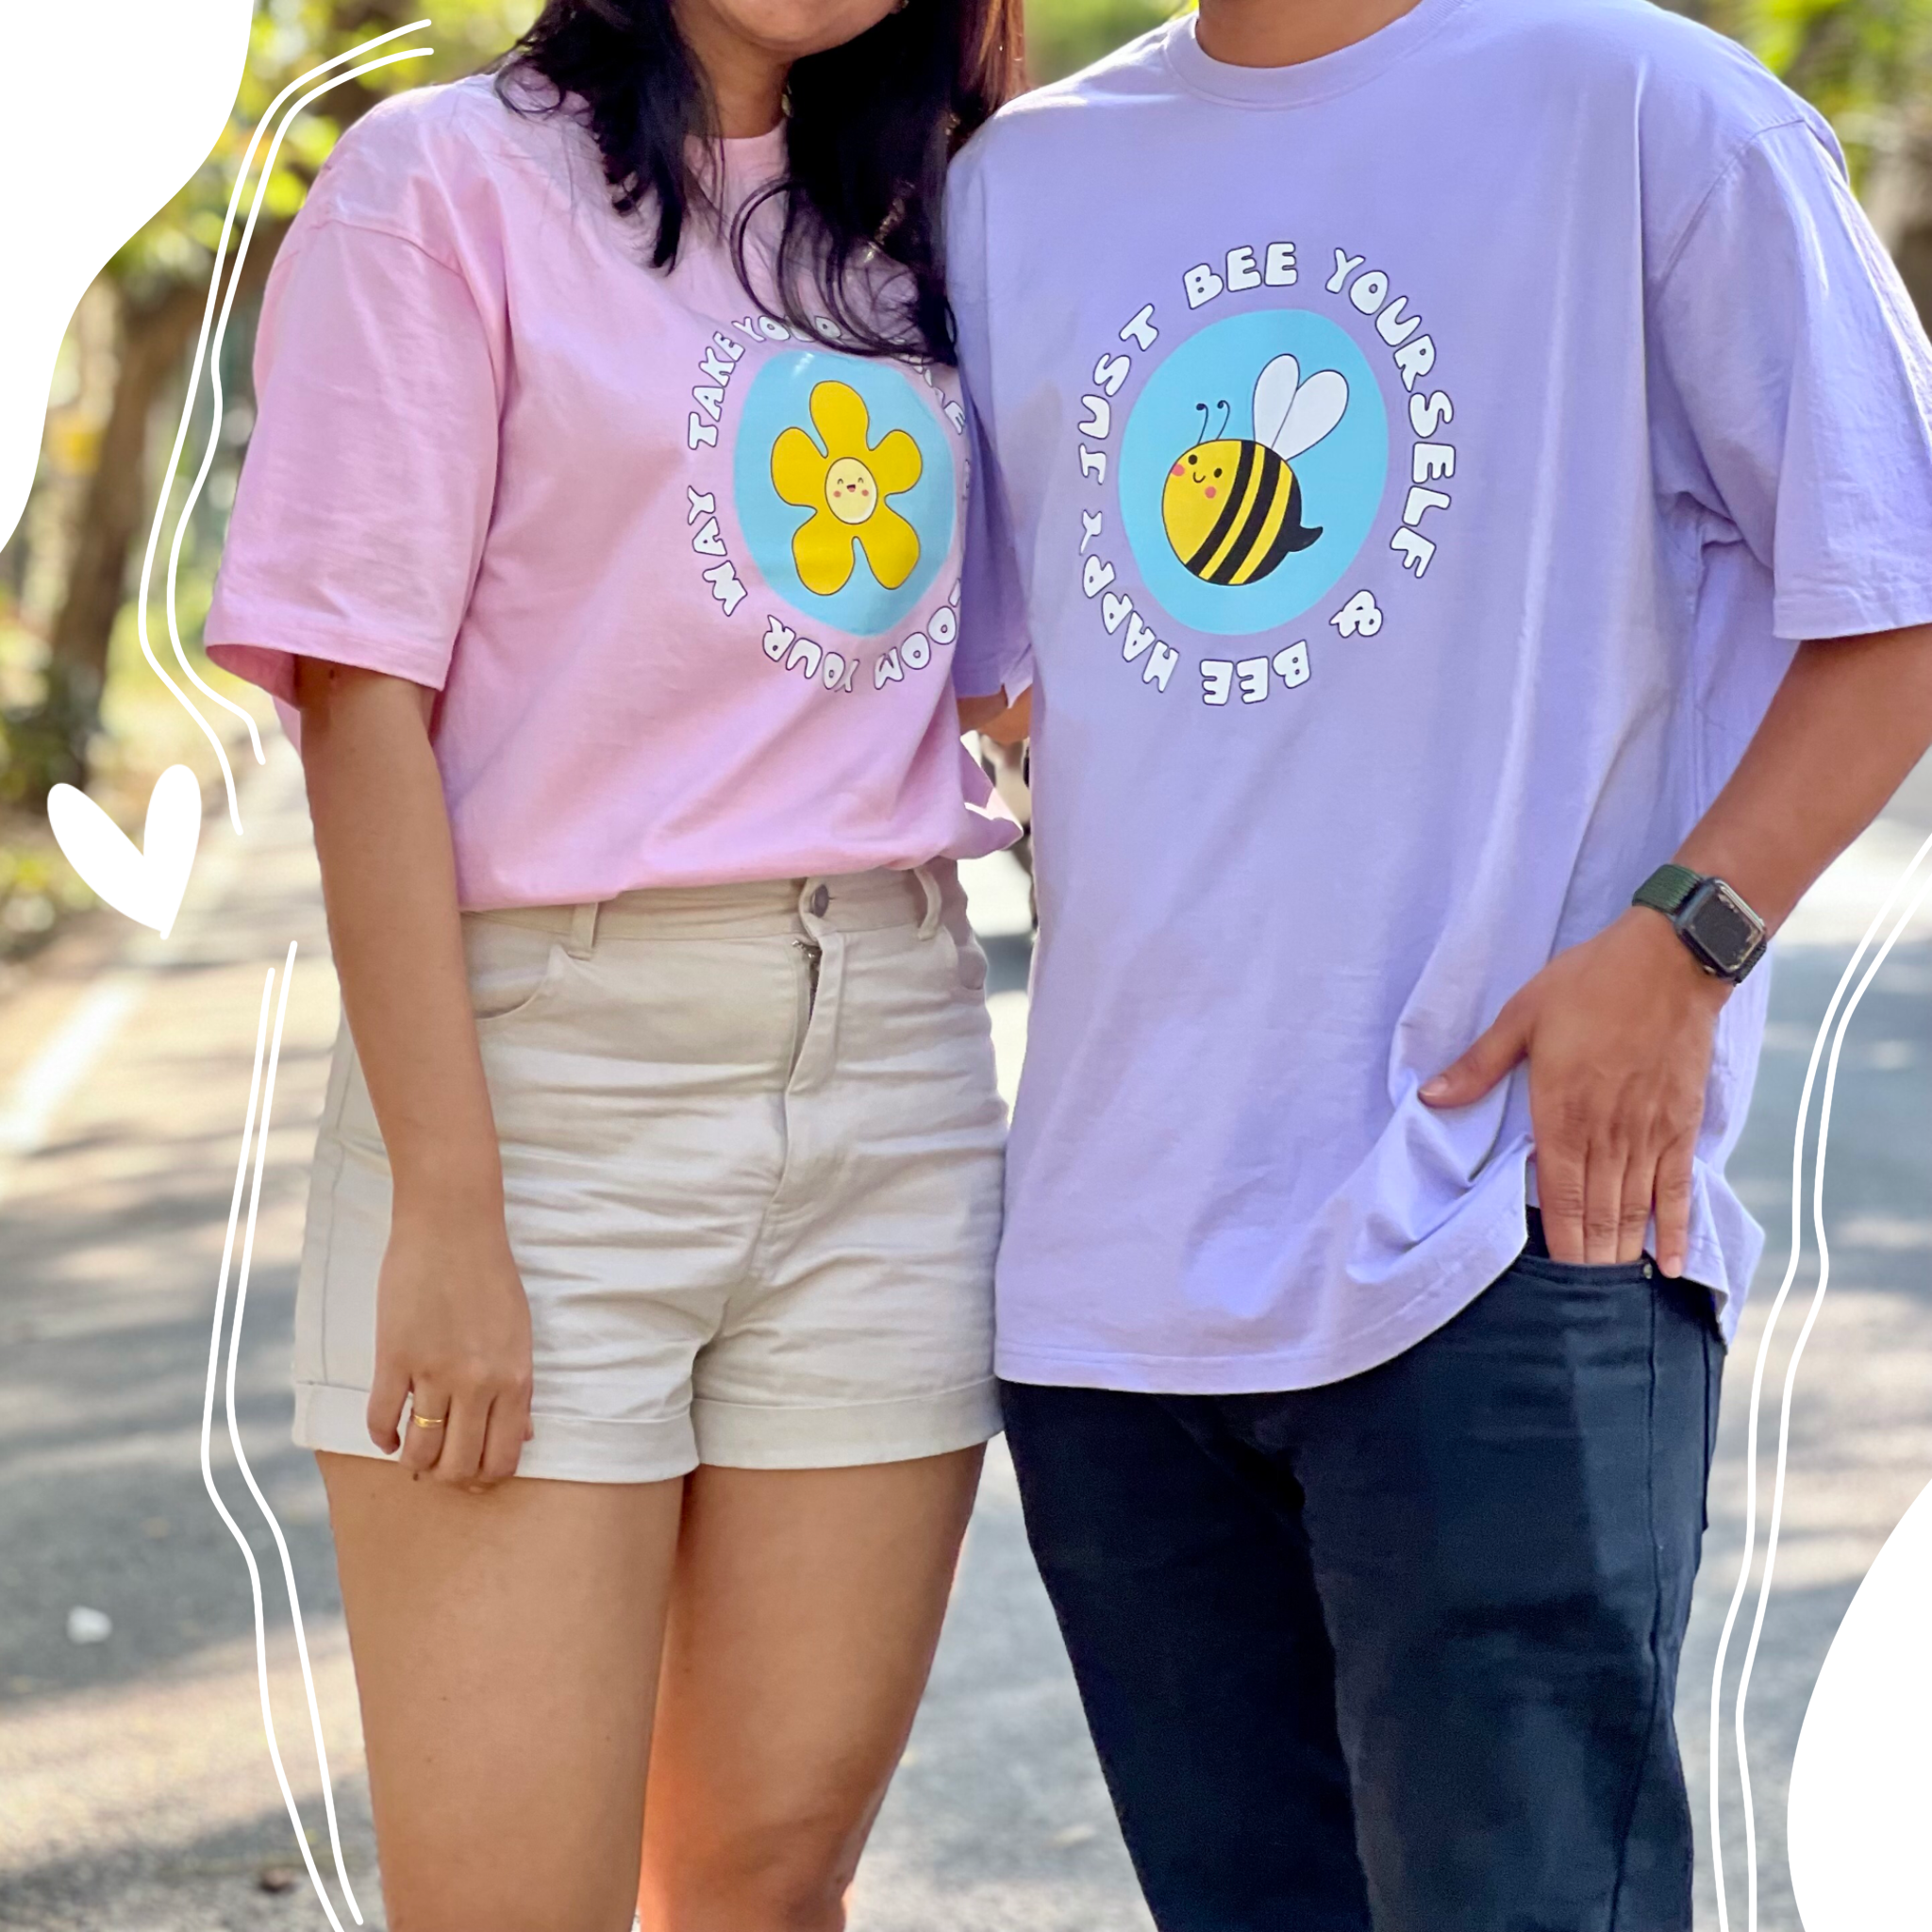 Bee You & Bloom Your Way Oversized T-shirts - Better Together